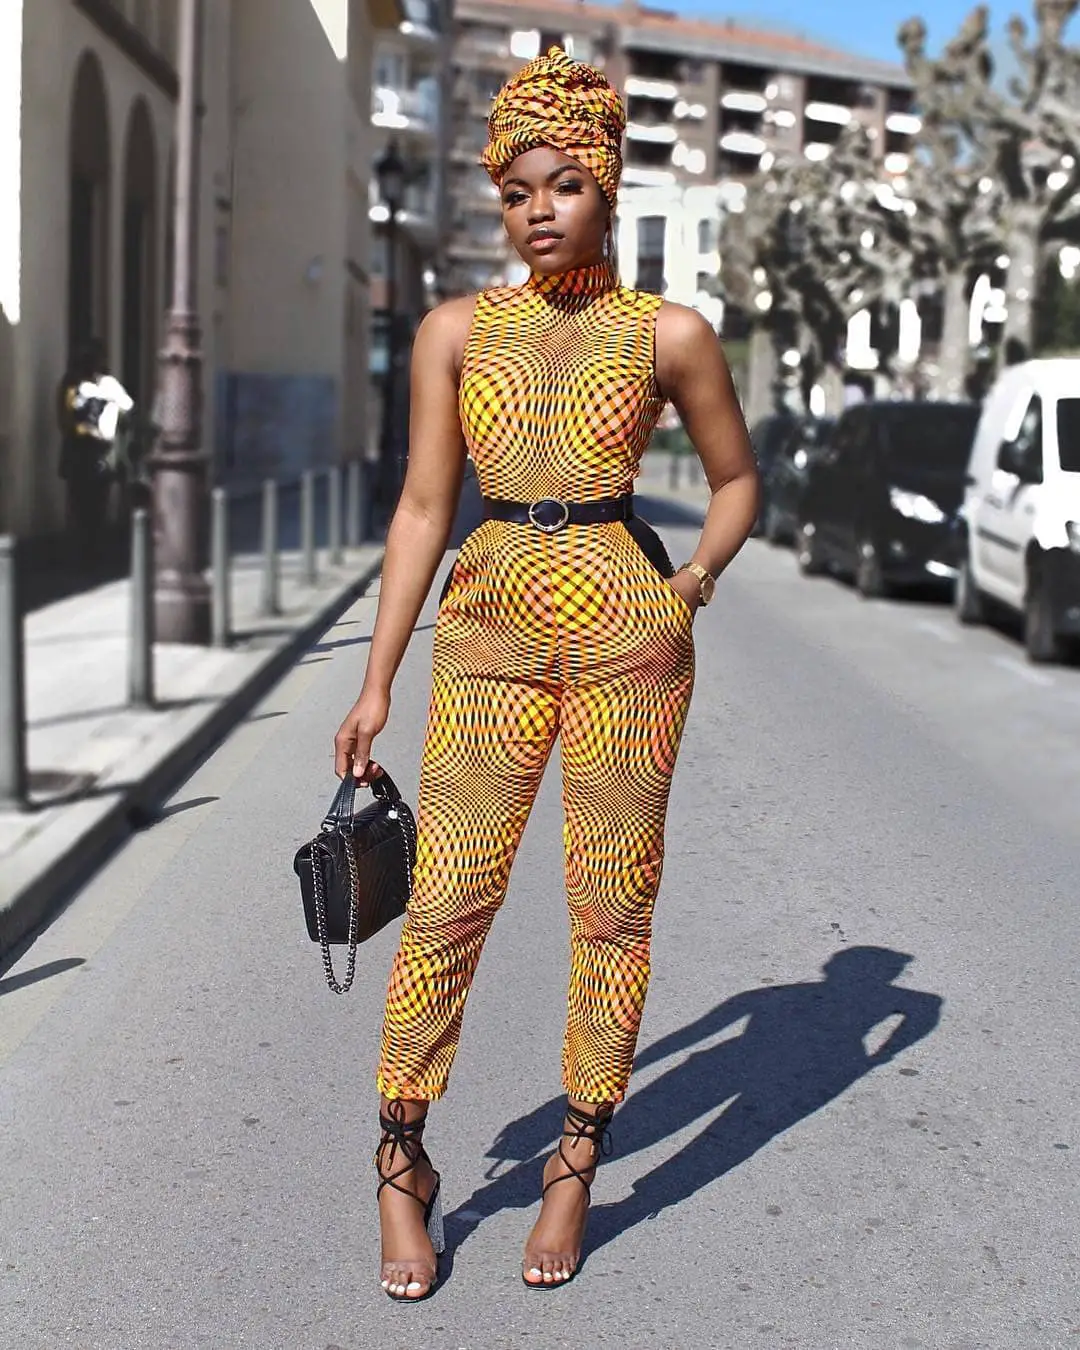 Are You Feeling These Fantastic Jumpsuit Styles?